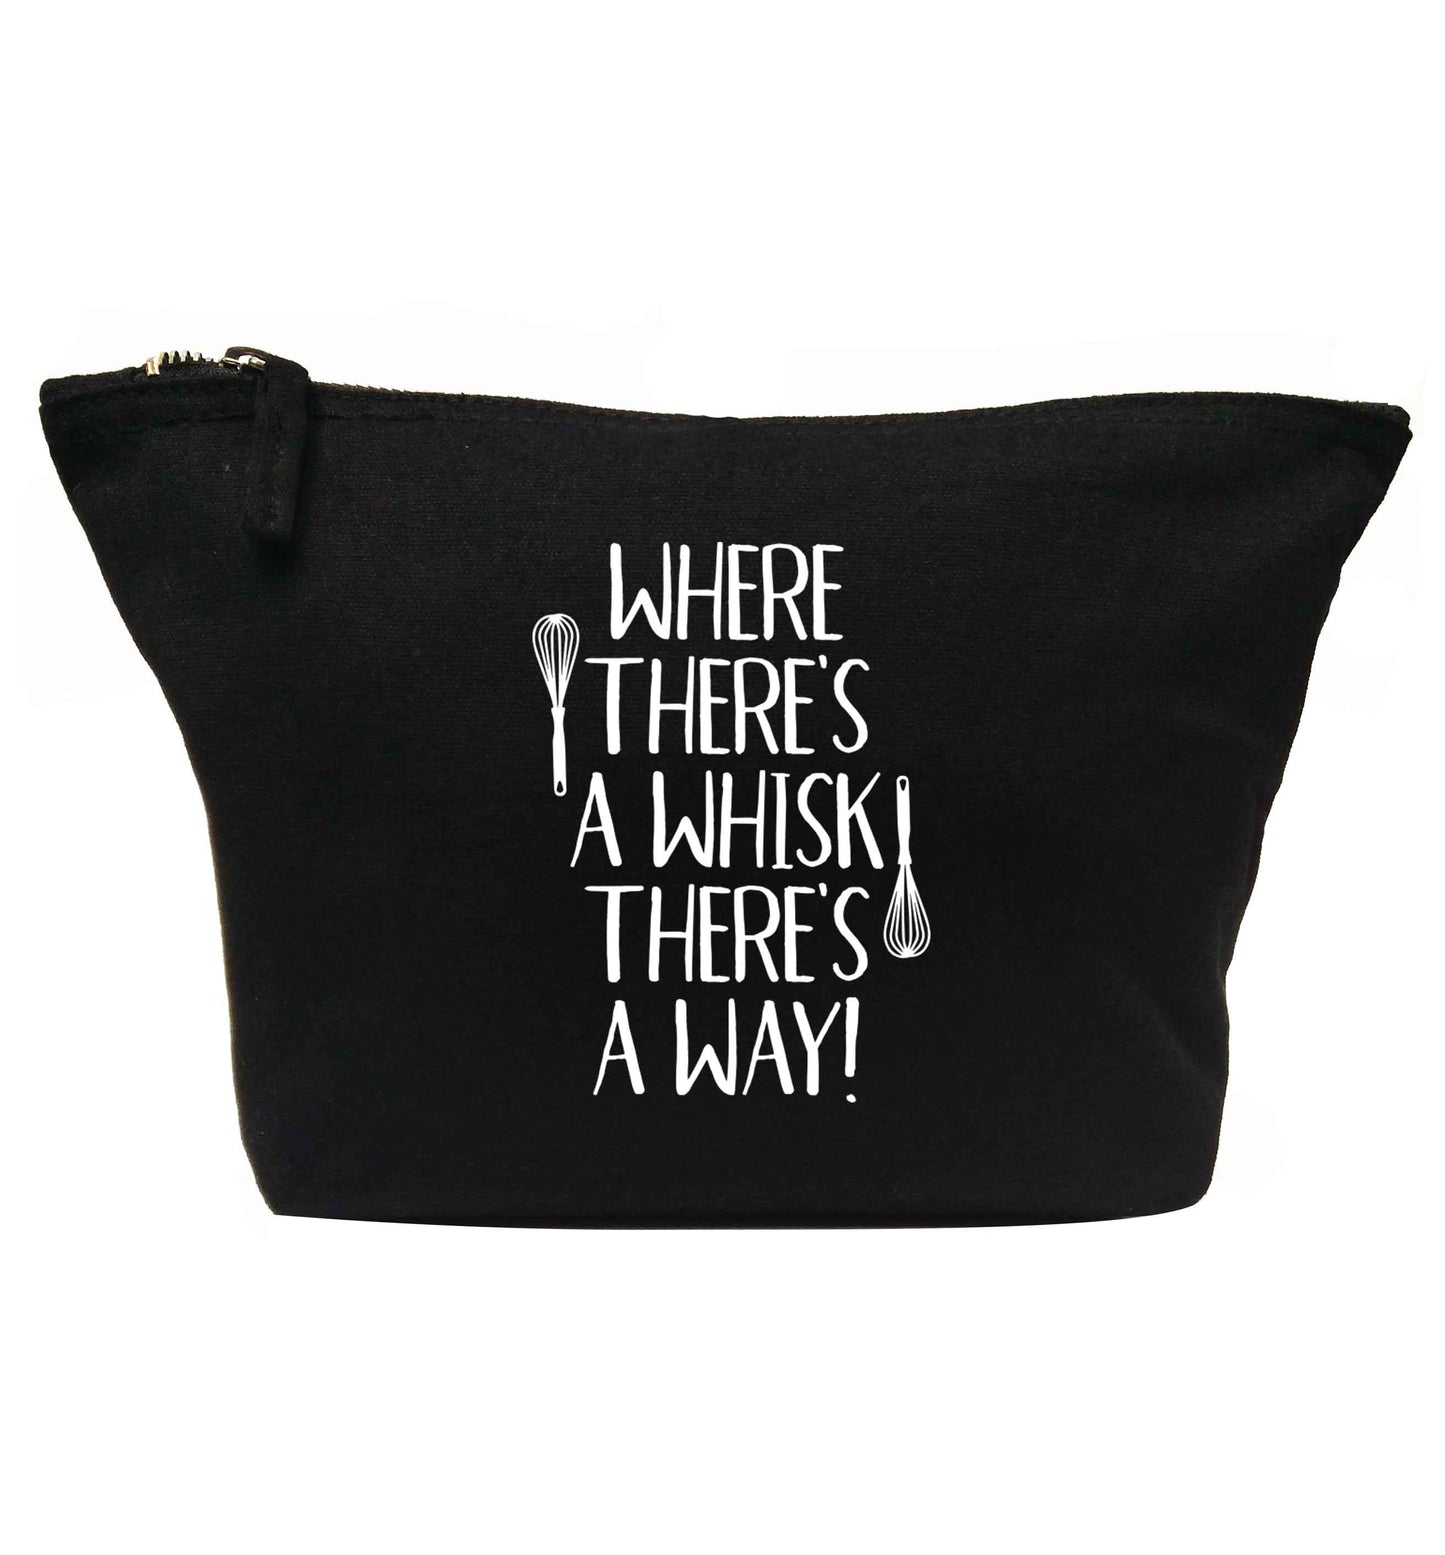 Where there's a whisk there's a way | makeup / wash bag